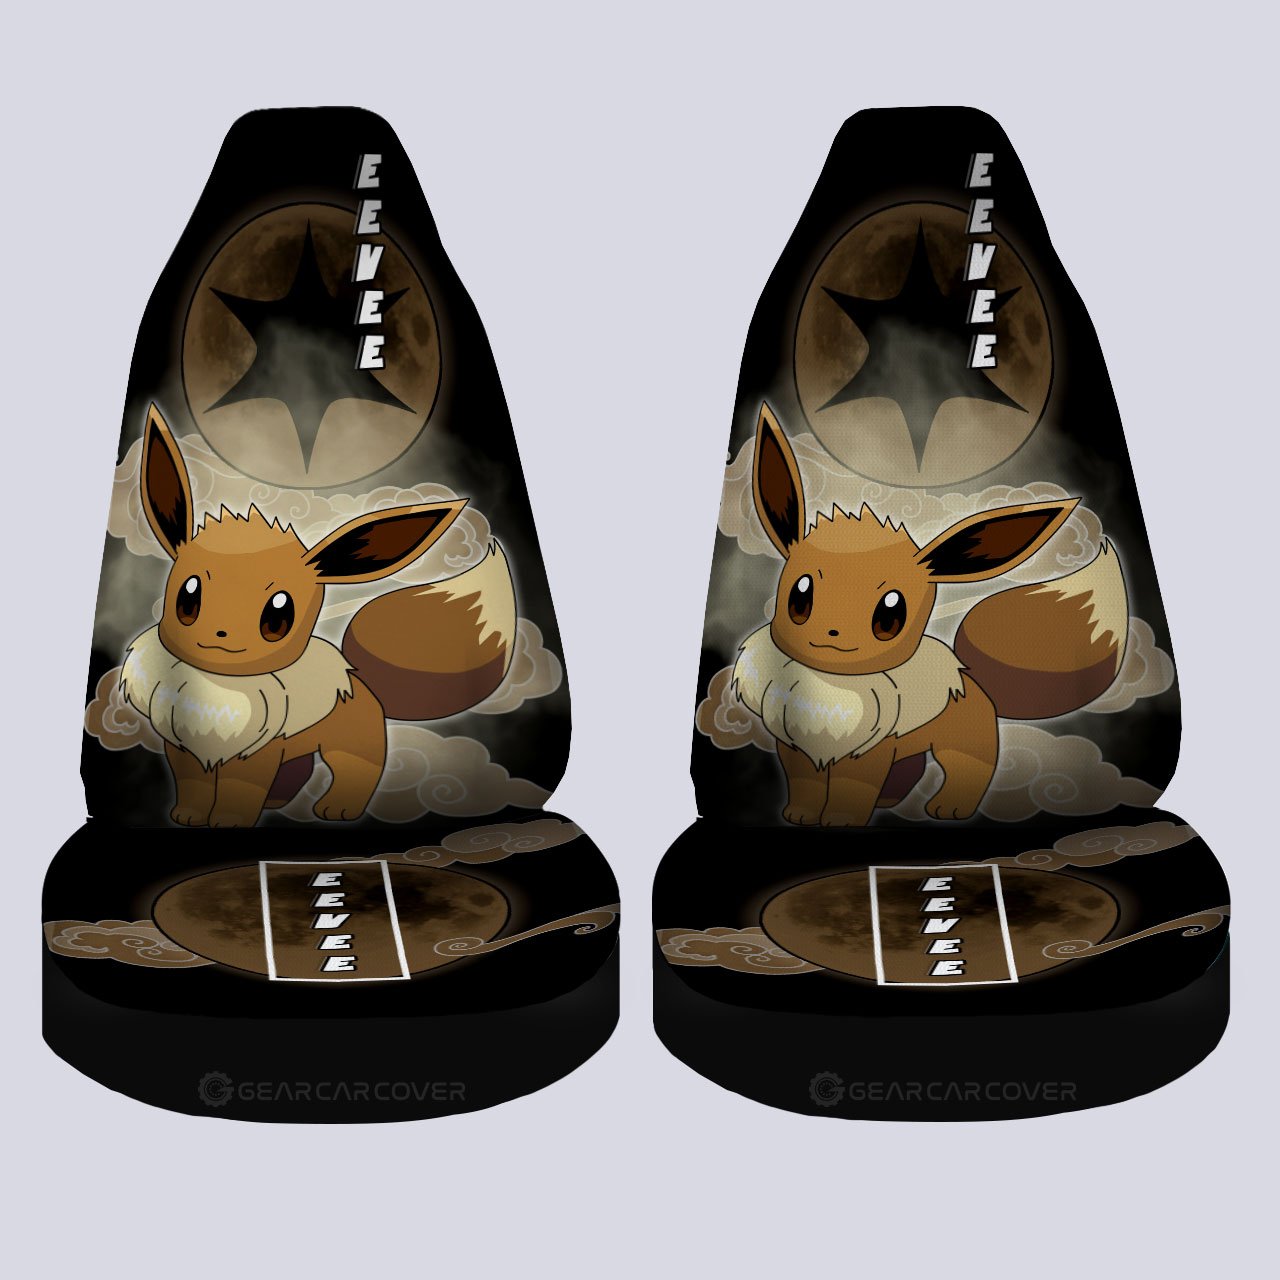 Eevee Car Seat Covers Custom Car Accessories For Fans - Gearcarcover - 4